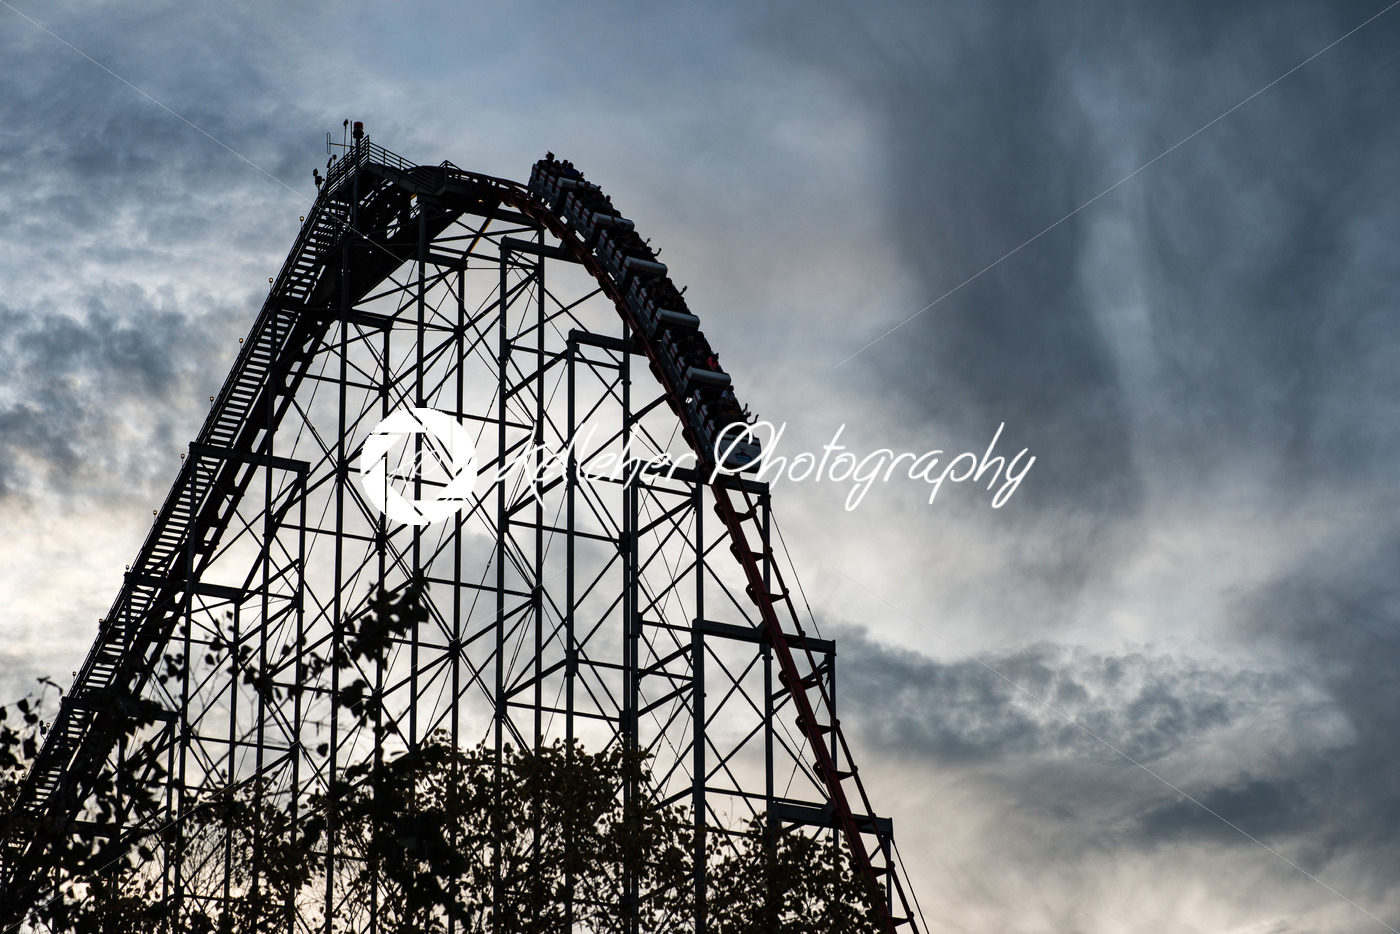 ALLENTOWN, PA – OCTOBER 22: Roller Coasters at Dorney Park in Allentown, Pennsylvania - Kelleher Photography Store